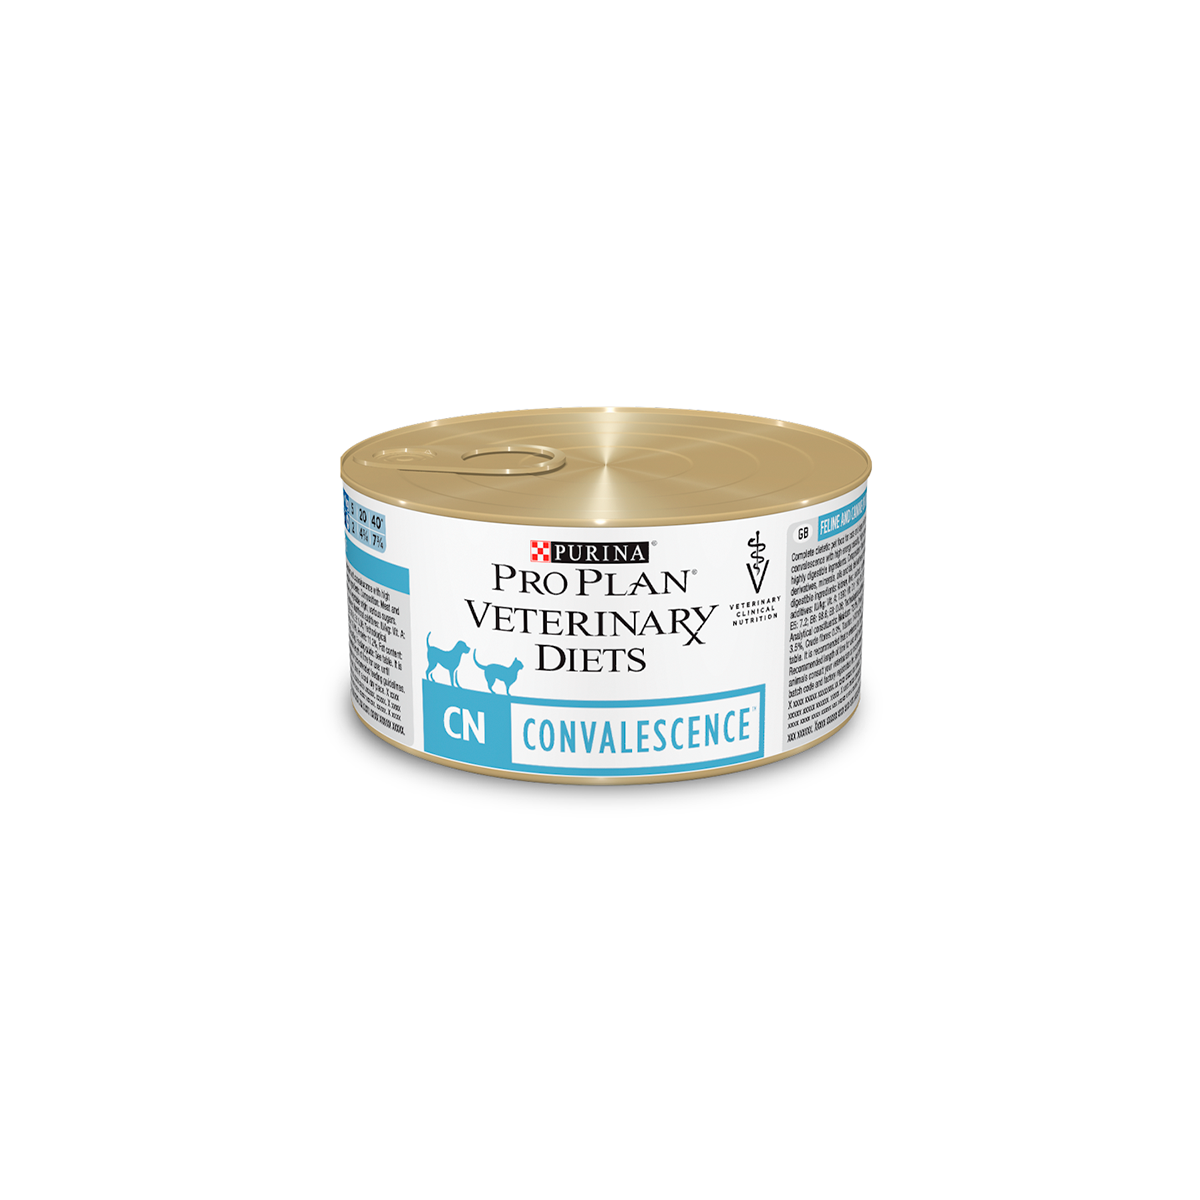 ProPlan-Veterinary-Diets-CN-Convalescence_0.png